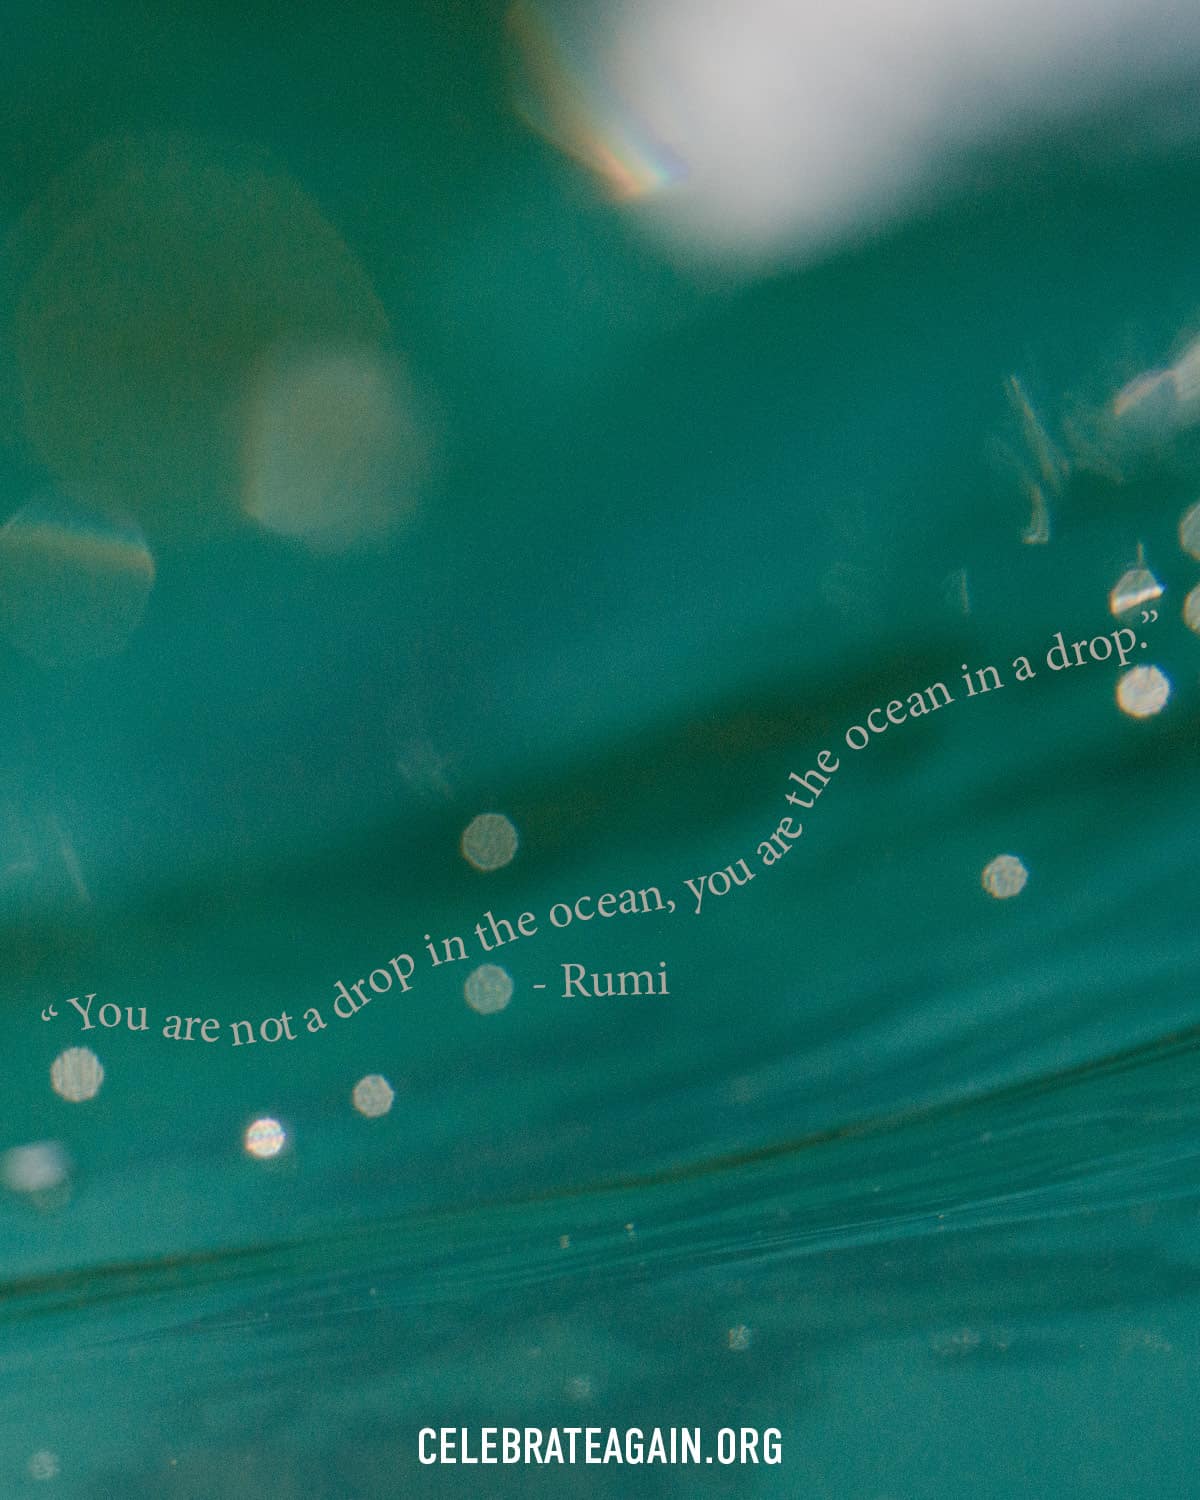 a short self love quote saying “You are not a drop in the ocean, you are the ocean in a drop.” - Rumi